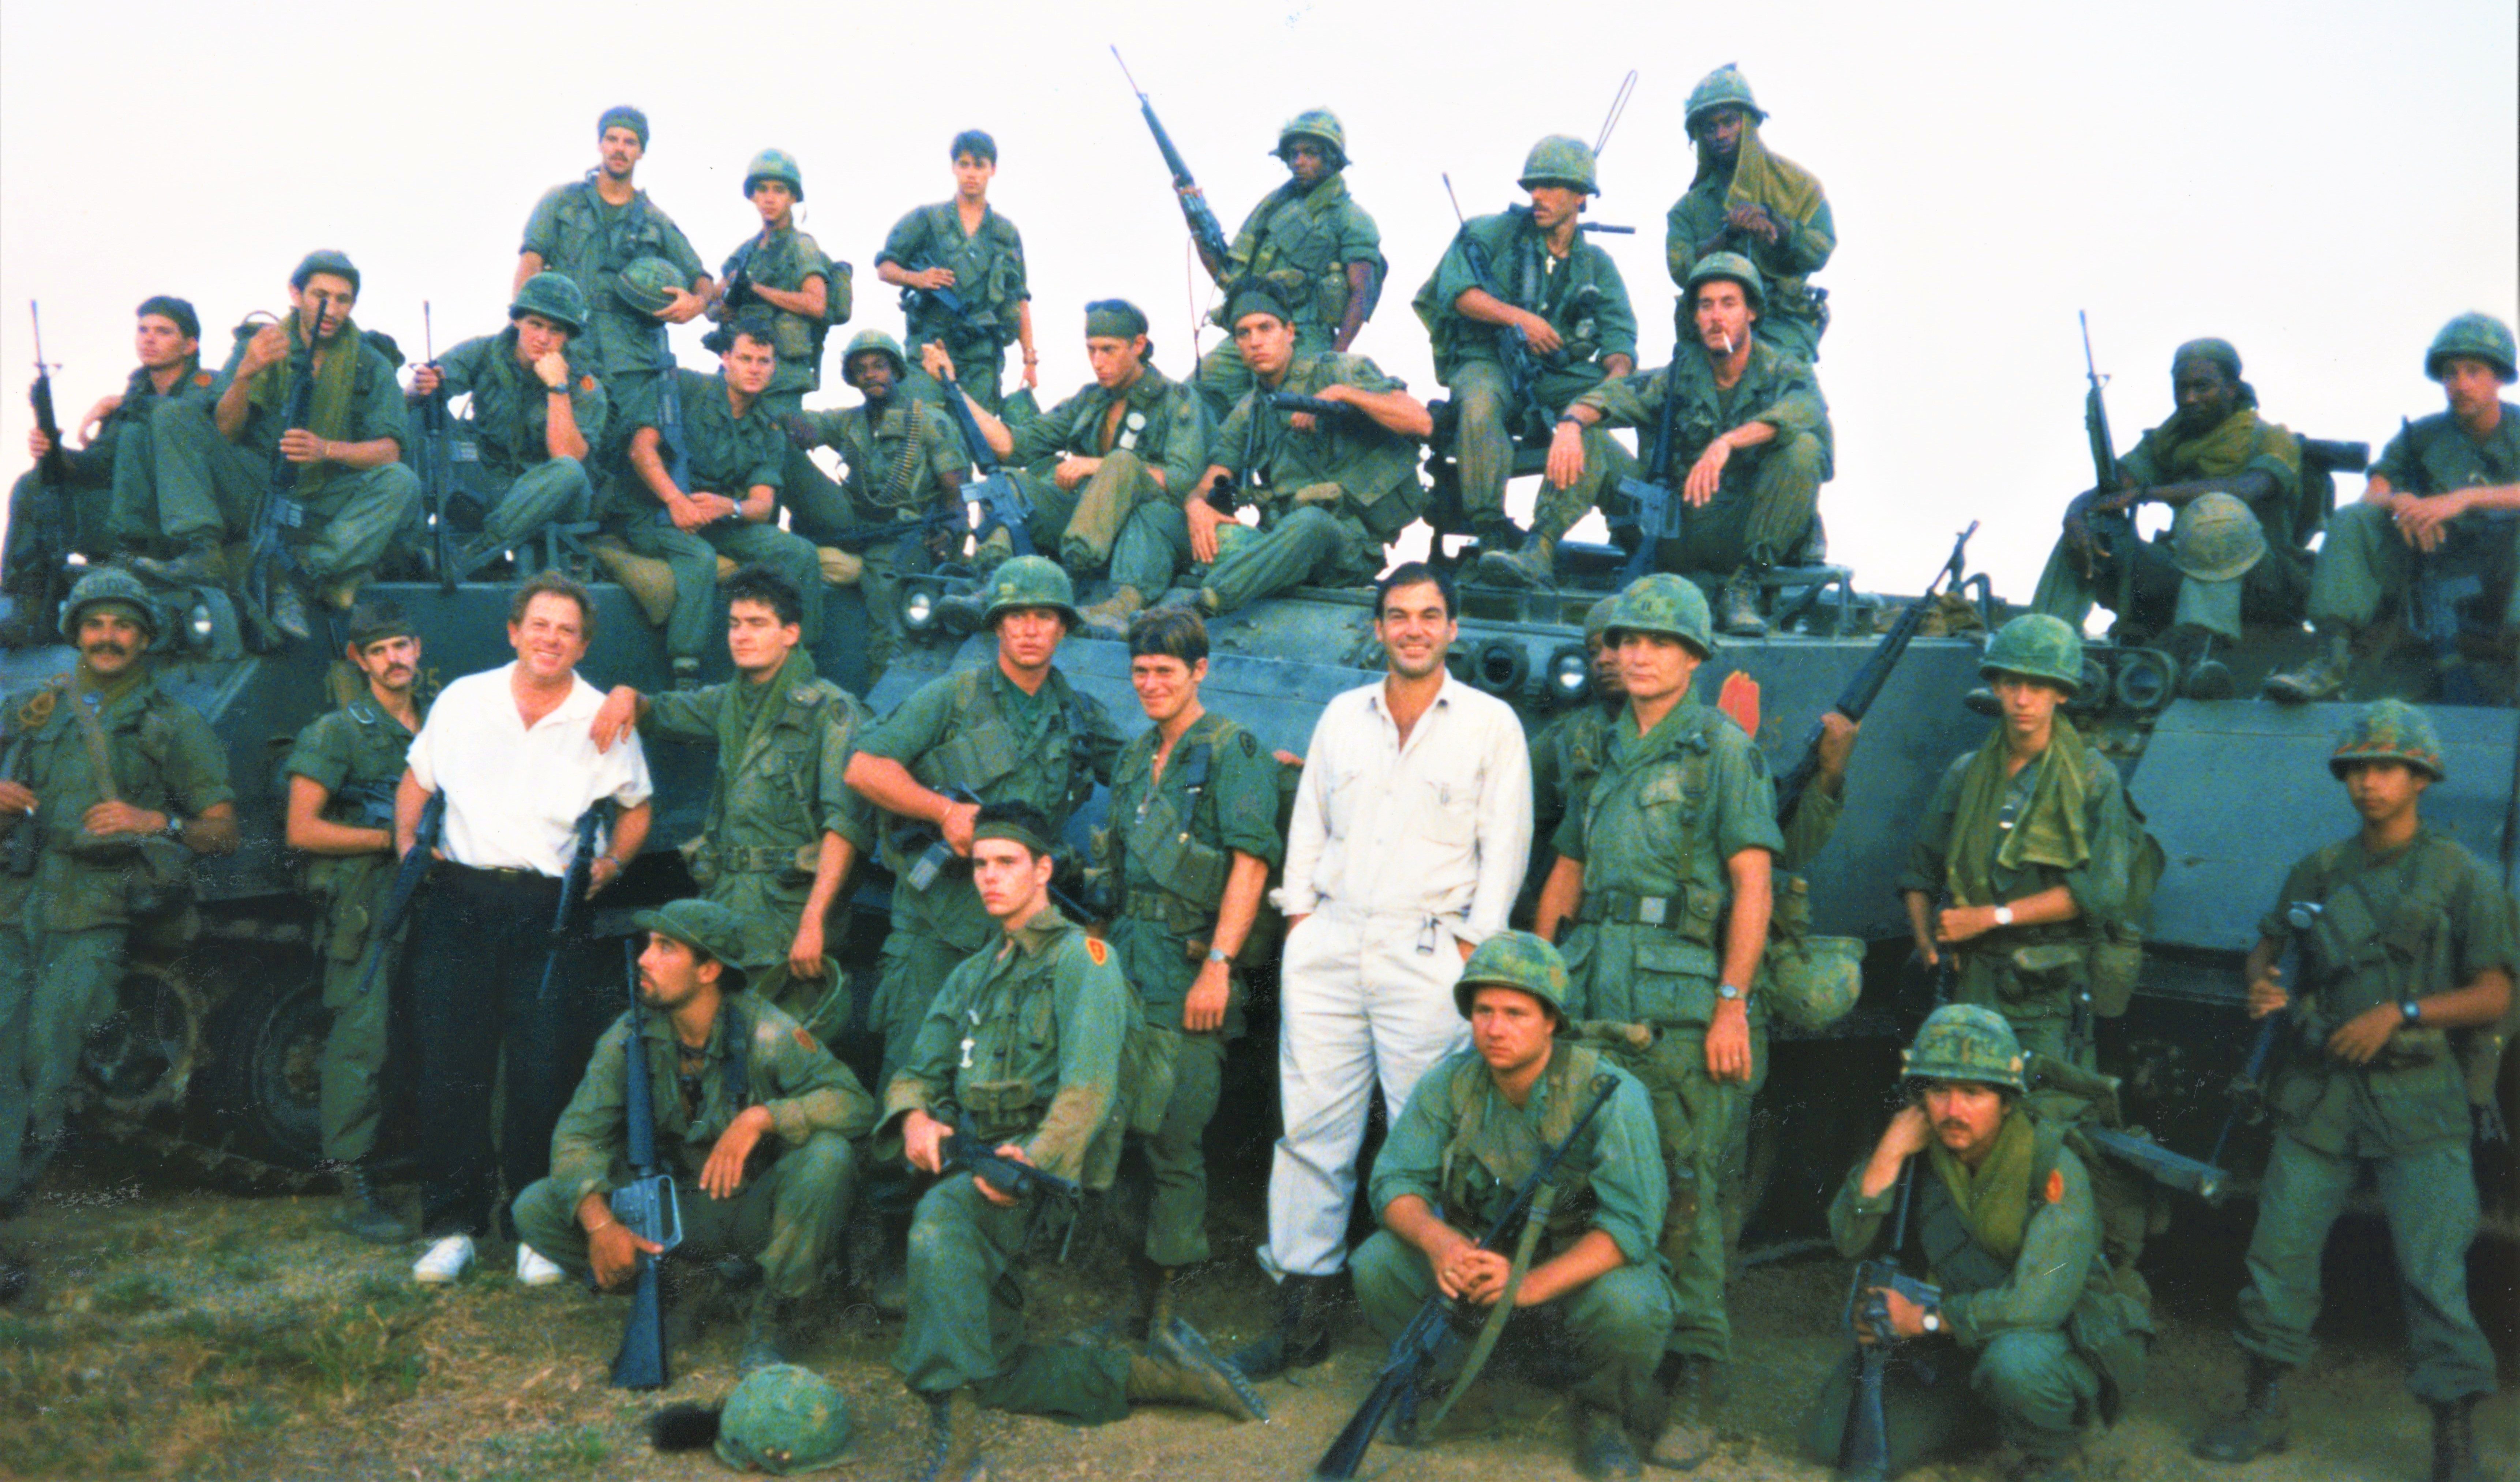 [Only IN Hollywood] Oliver Stone talks about his memoir, ‘Platoon’ shoot in Philippines